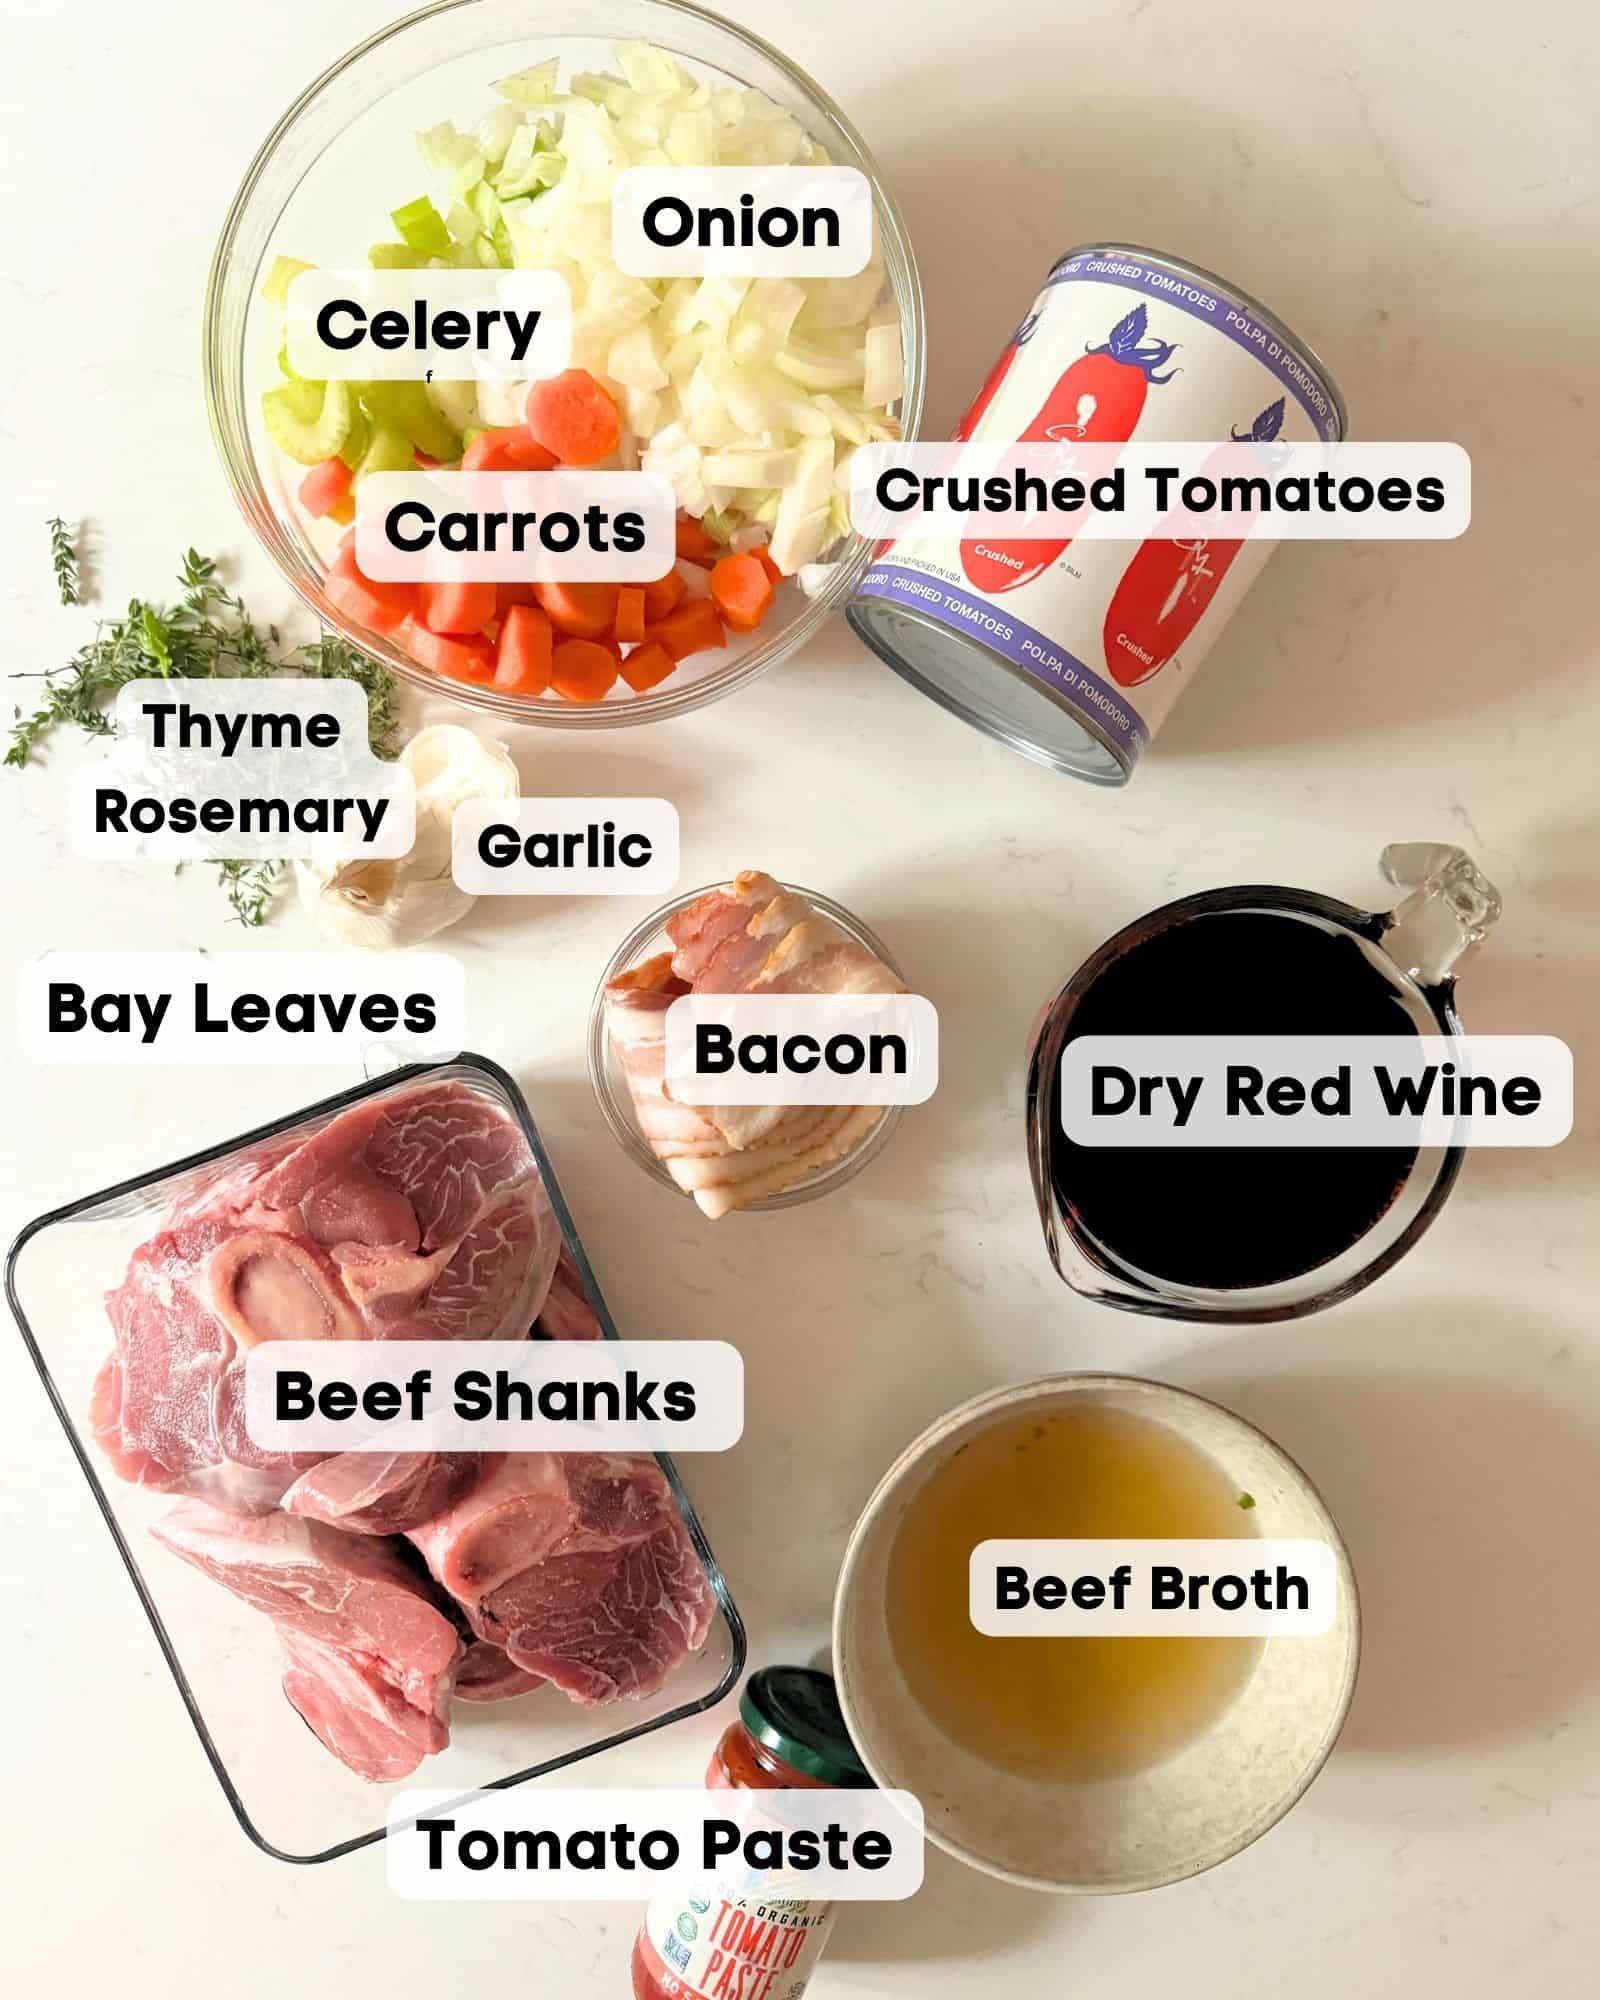 ingredients to make osso buco on a white surface - beef shanks, red wine, garlic, hersb, bacon, beef broth, tomato paste, crushed tomatoes, celery, carrots, and onions.